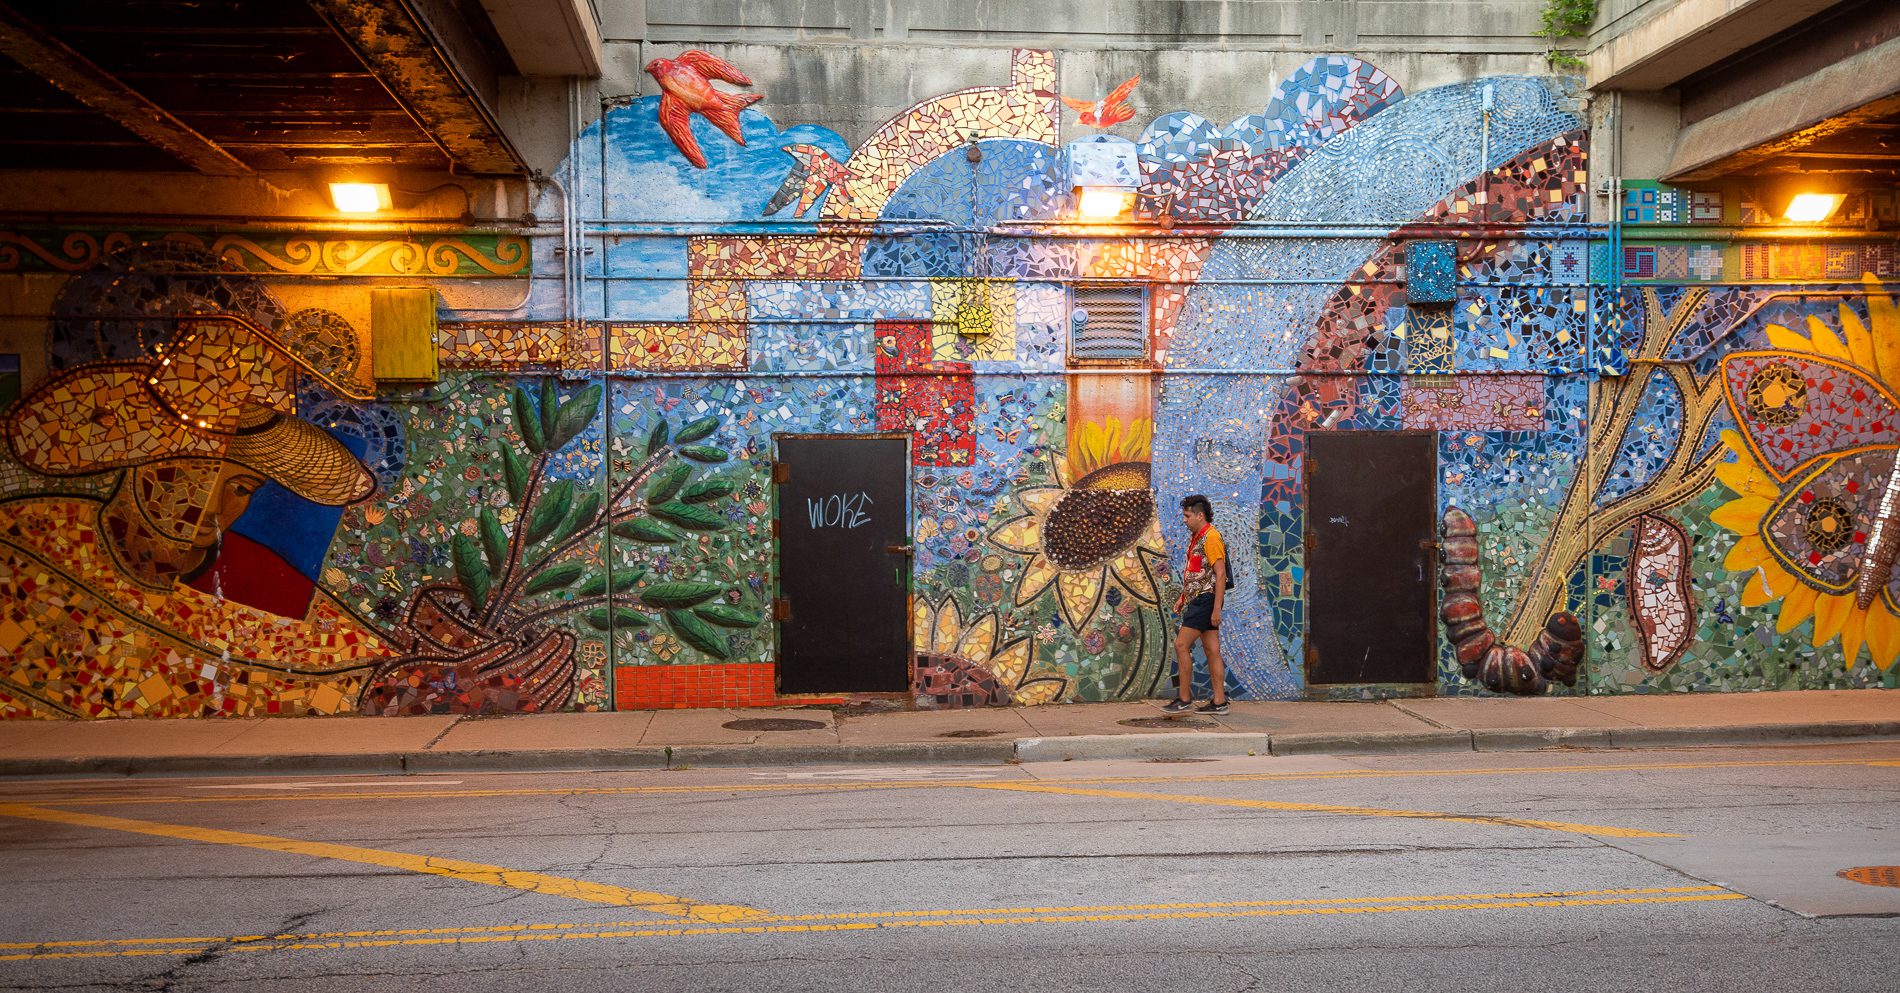 J Saxon walks past a colorful mural in the Edgewater